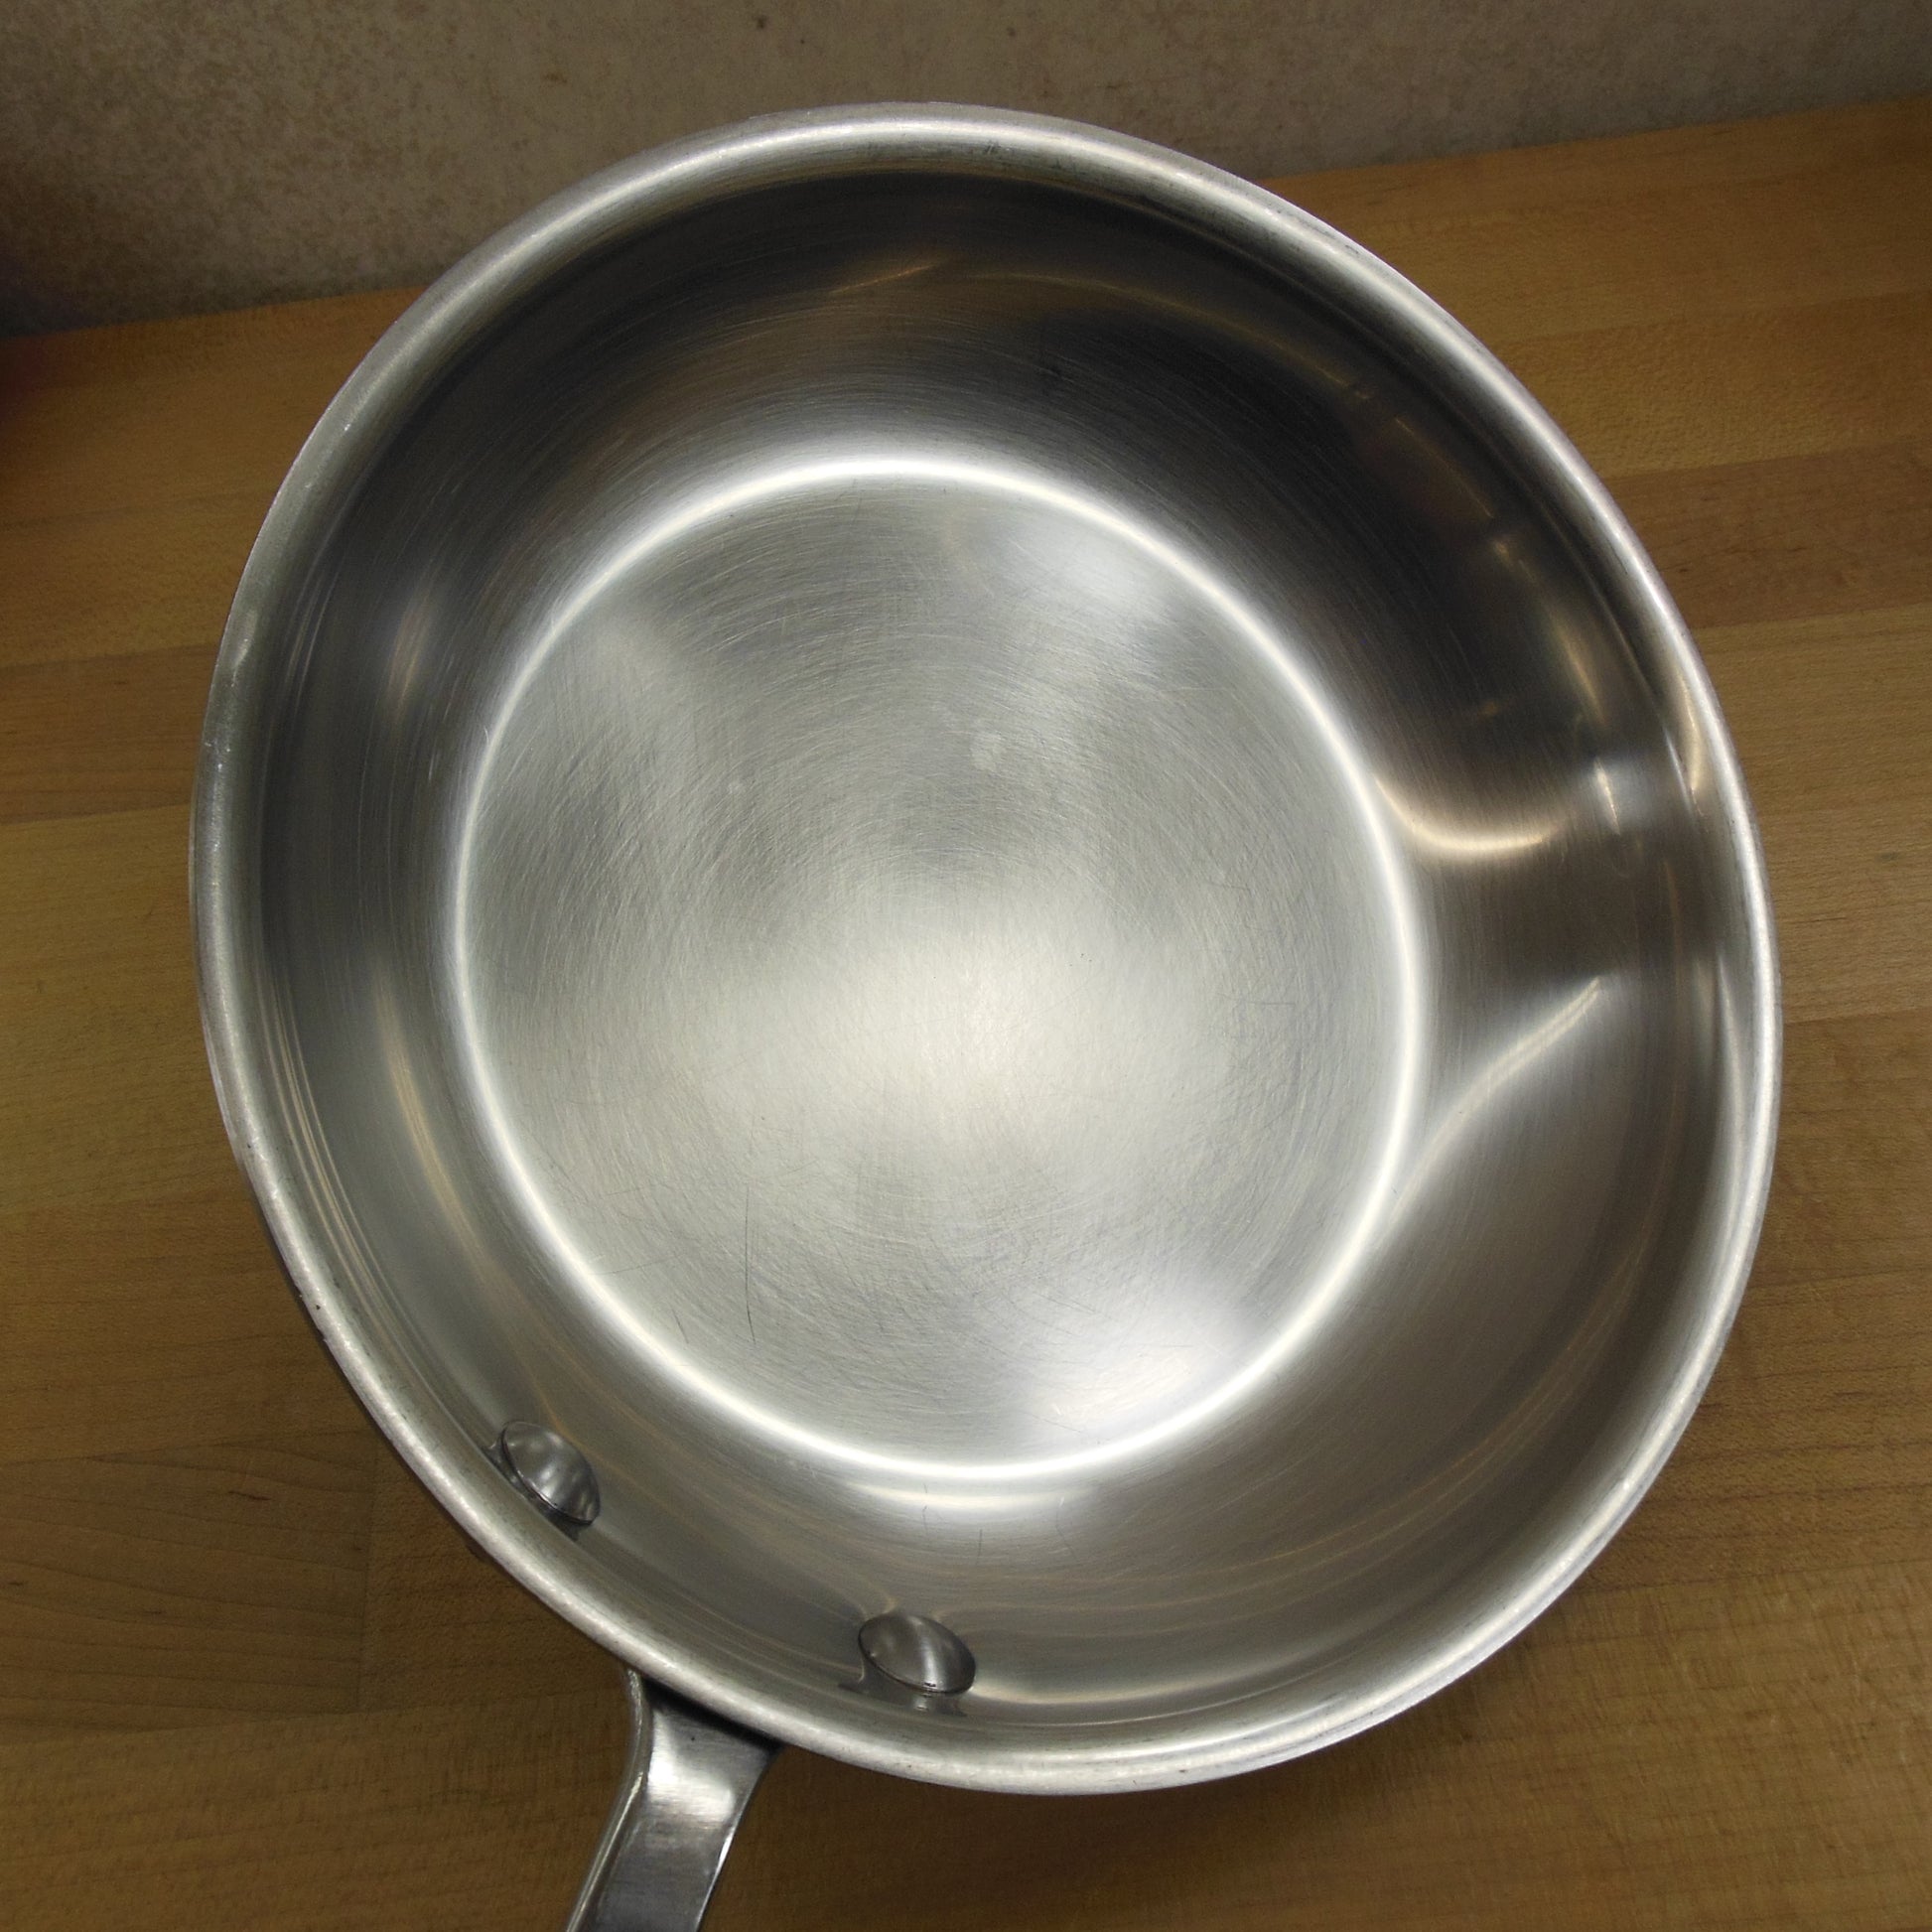 All-Clad Ltd Stainless Anodized 8.5" Fry Pan Skillet interior steel